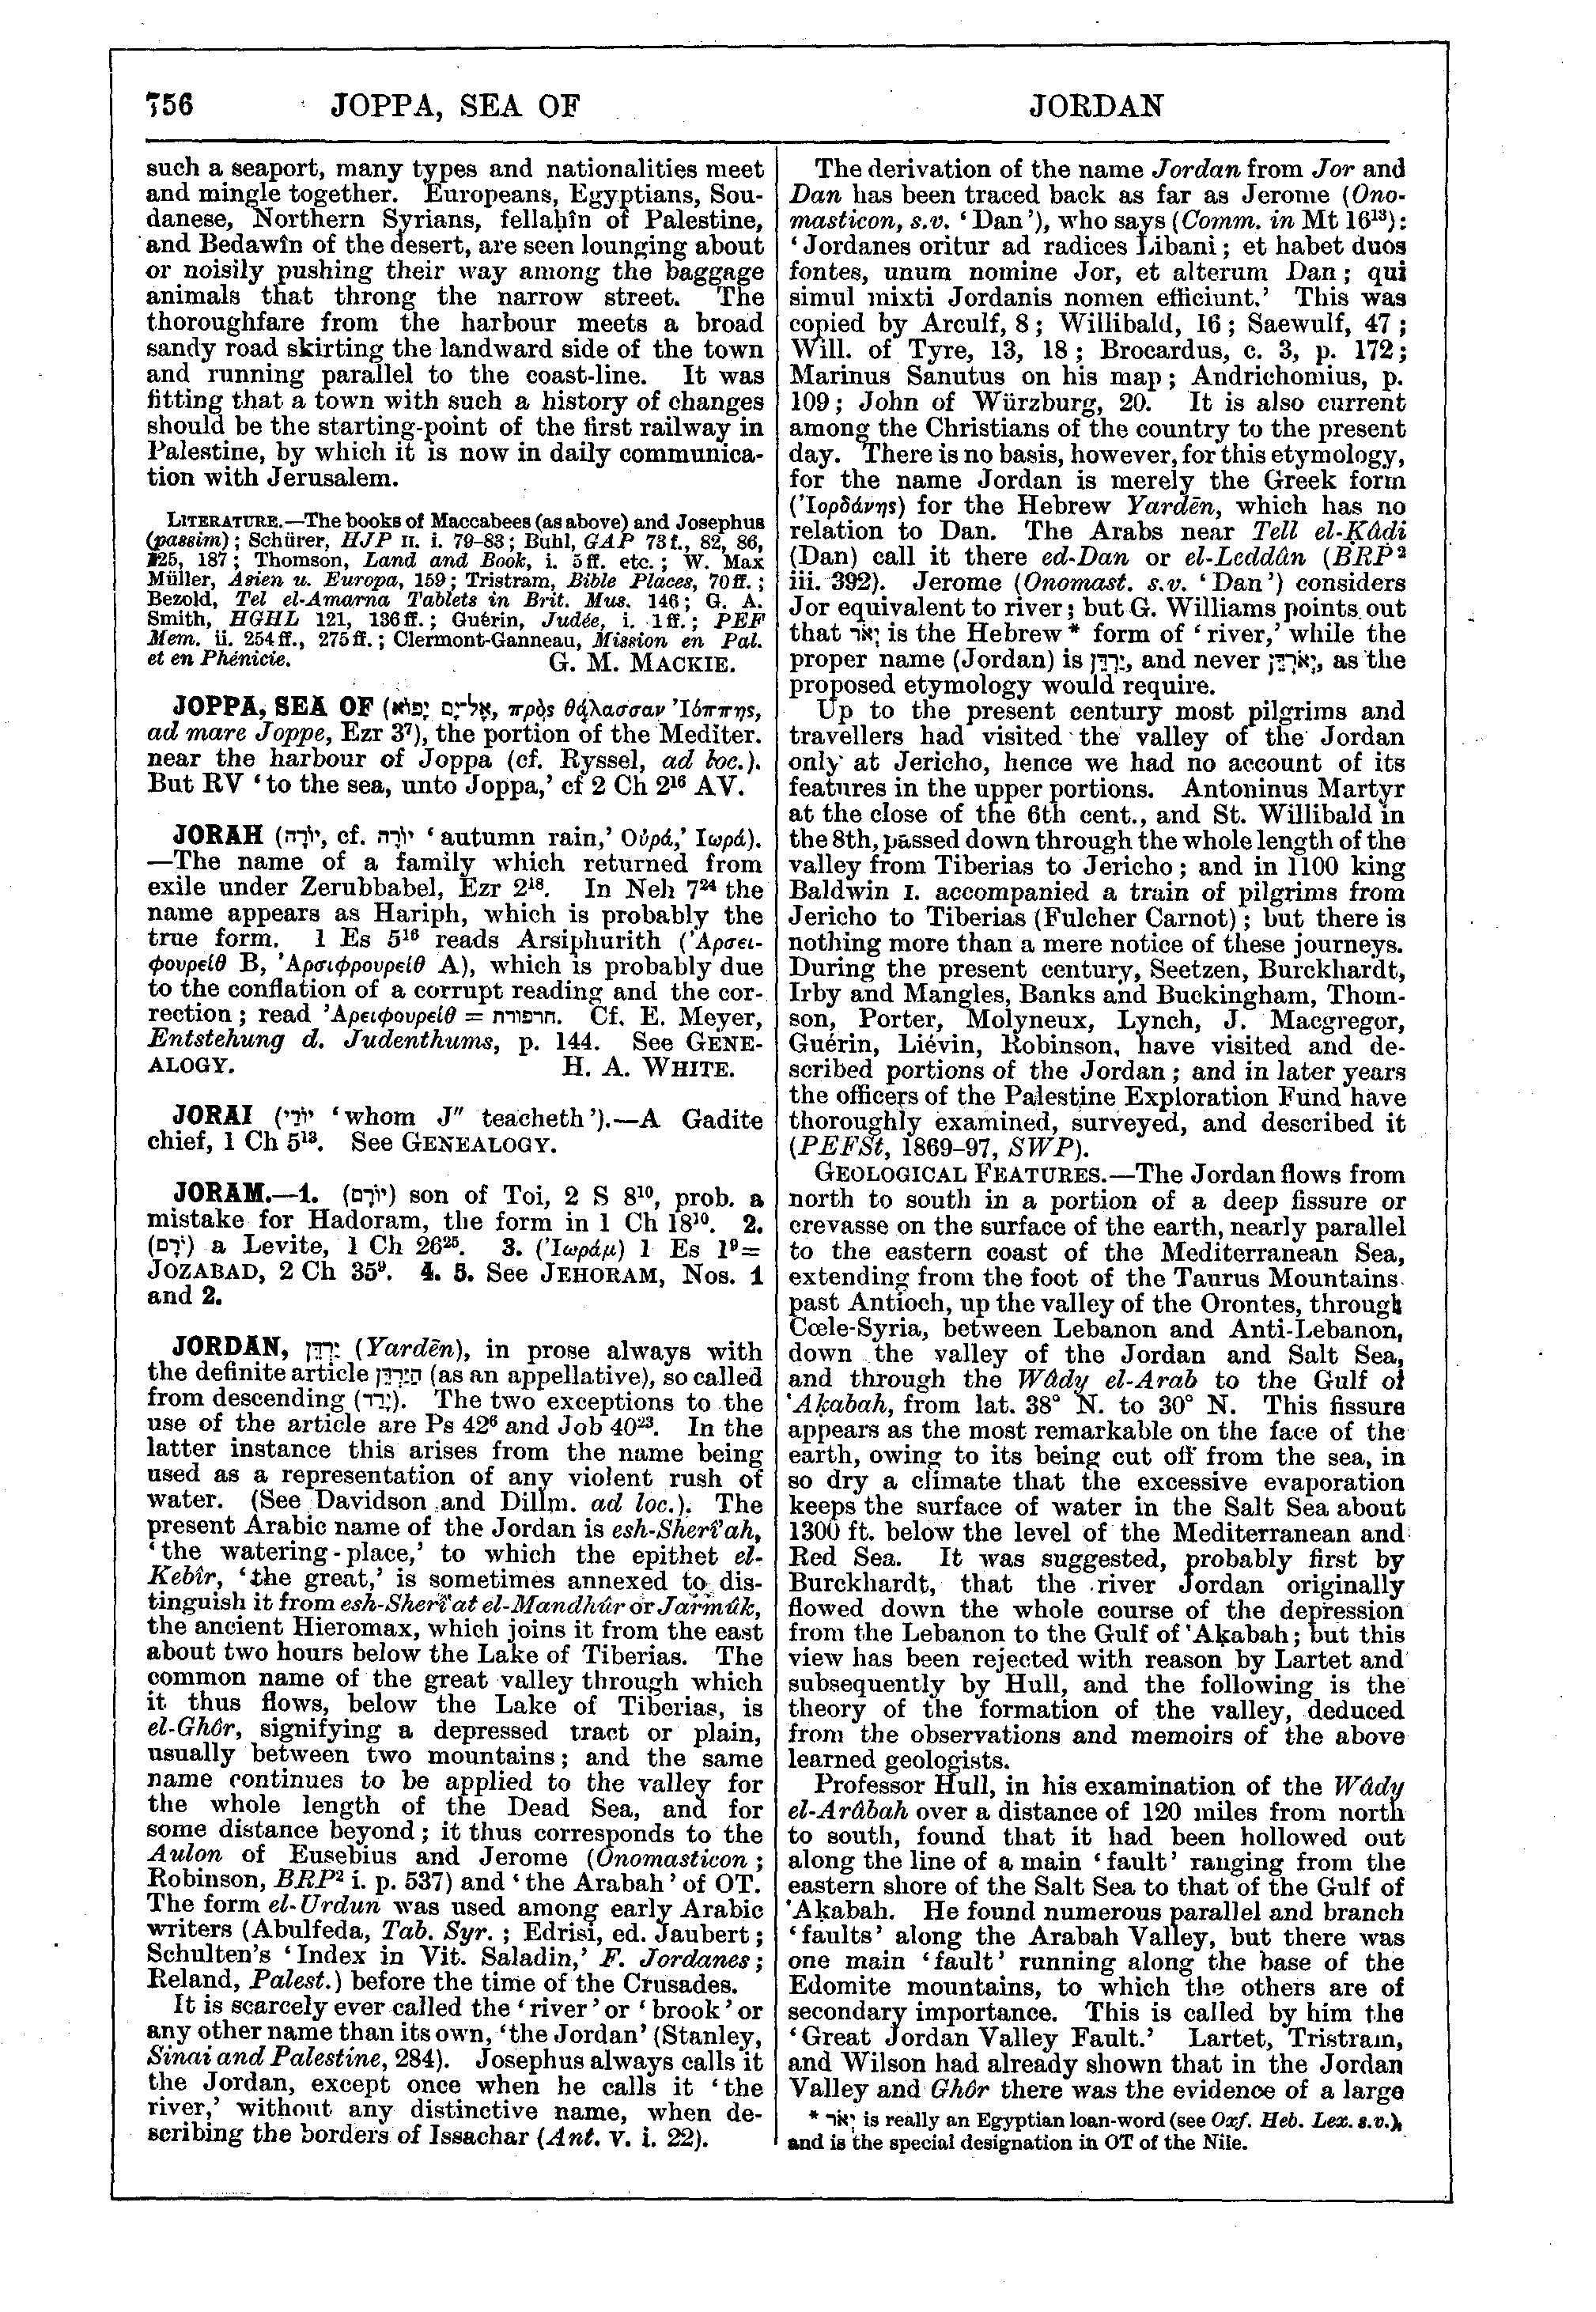 Image of page 756